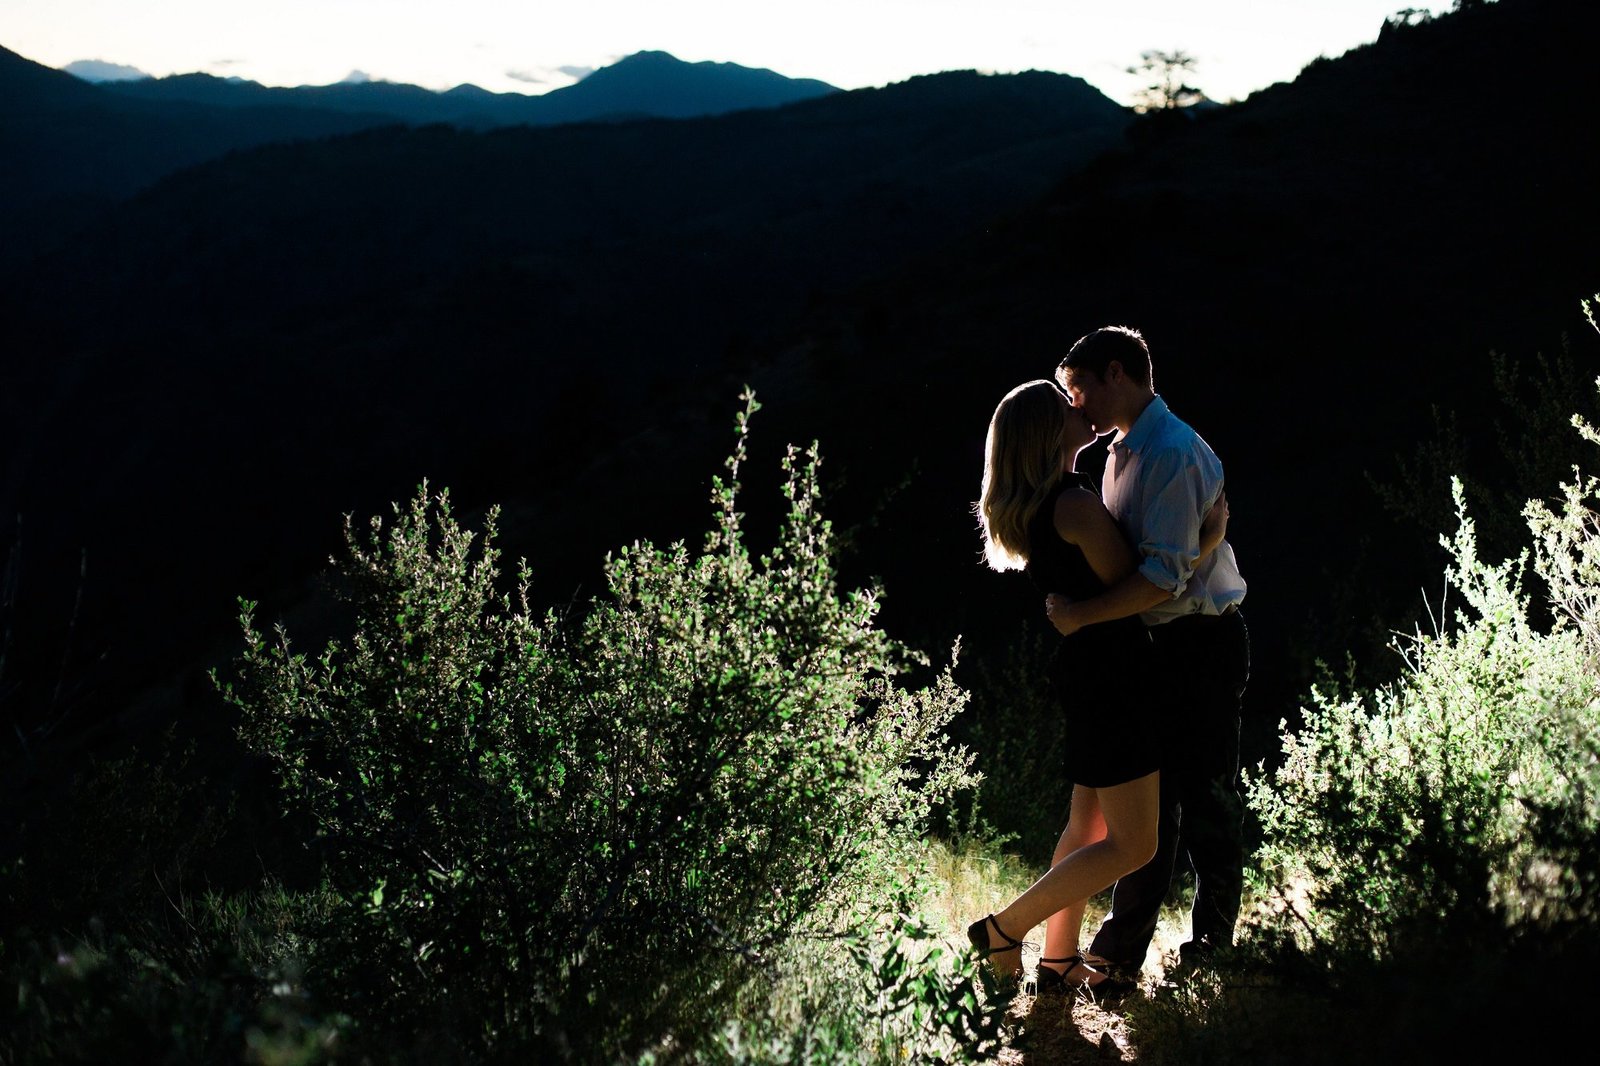 Engagements -Denver Lookout Mountain Engagement Session Golden Colorado Wedding Photographer Overlook City Lights Nature Outdoors Valley Light Couple (4)